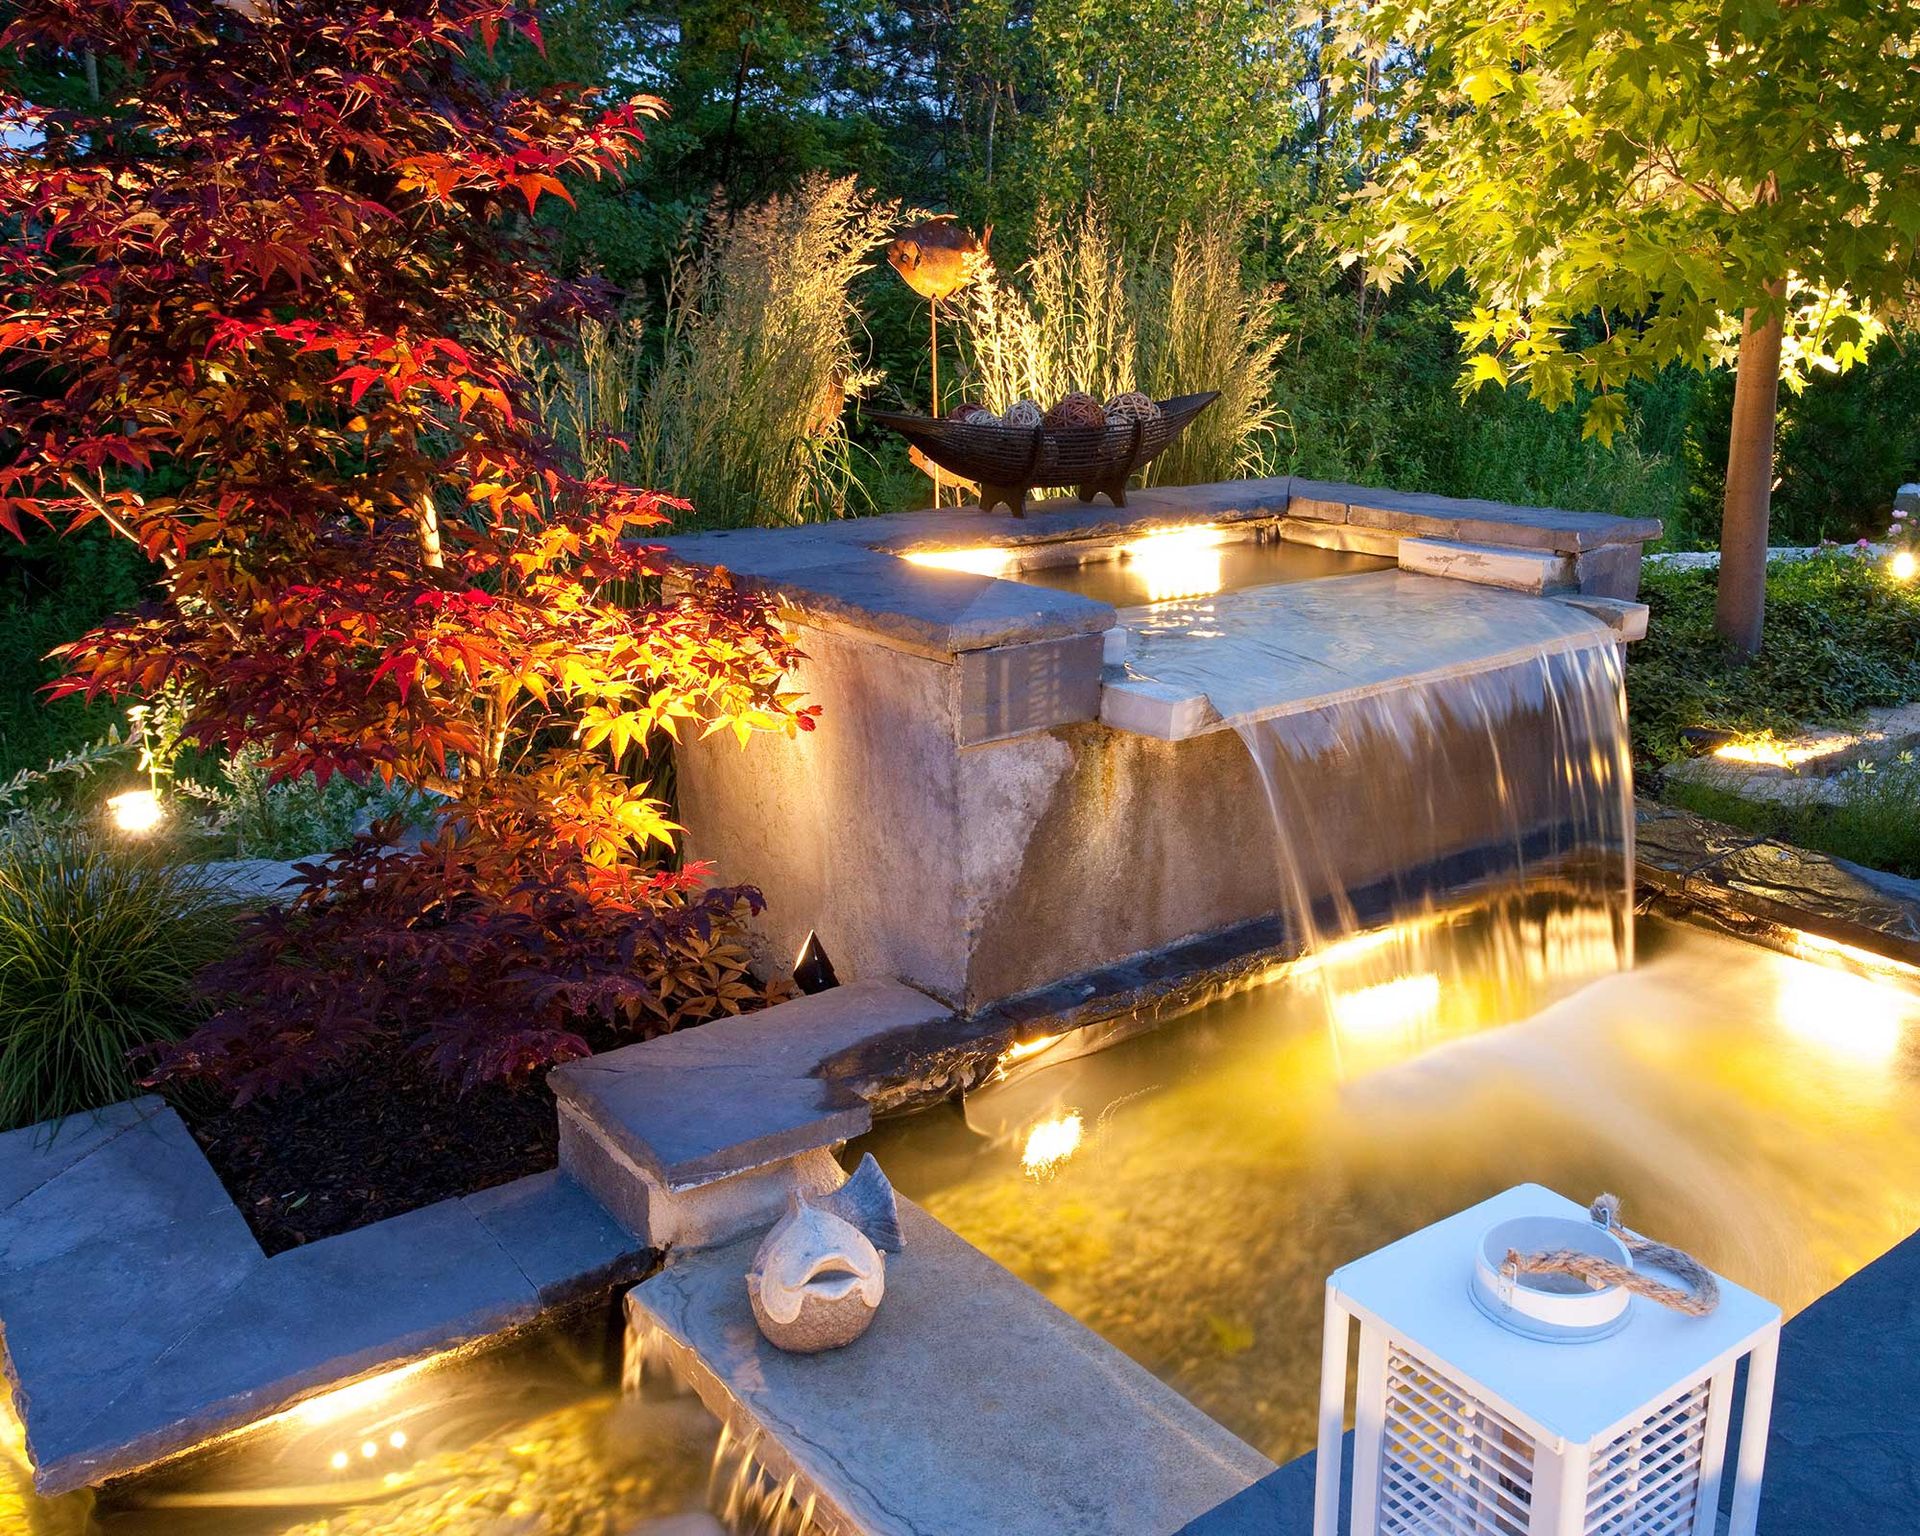 Pond ideas with waterfalls: 11 decorative ways to give your garden a ...